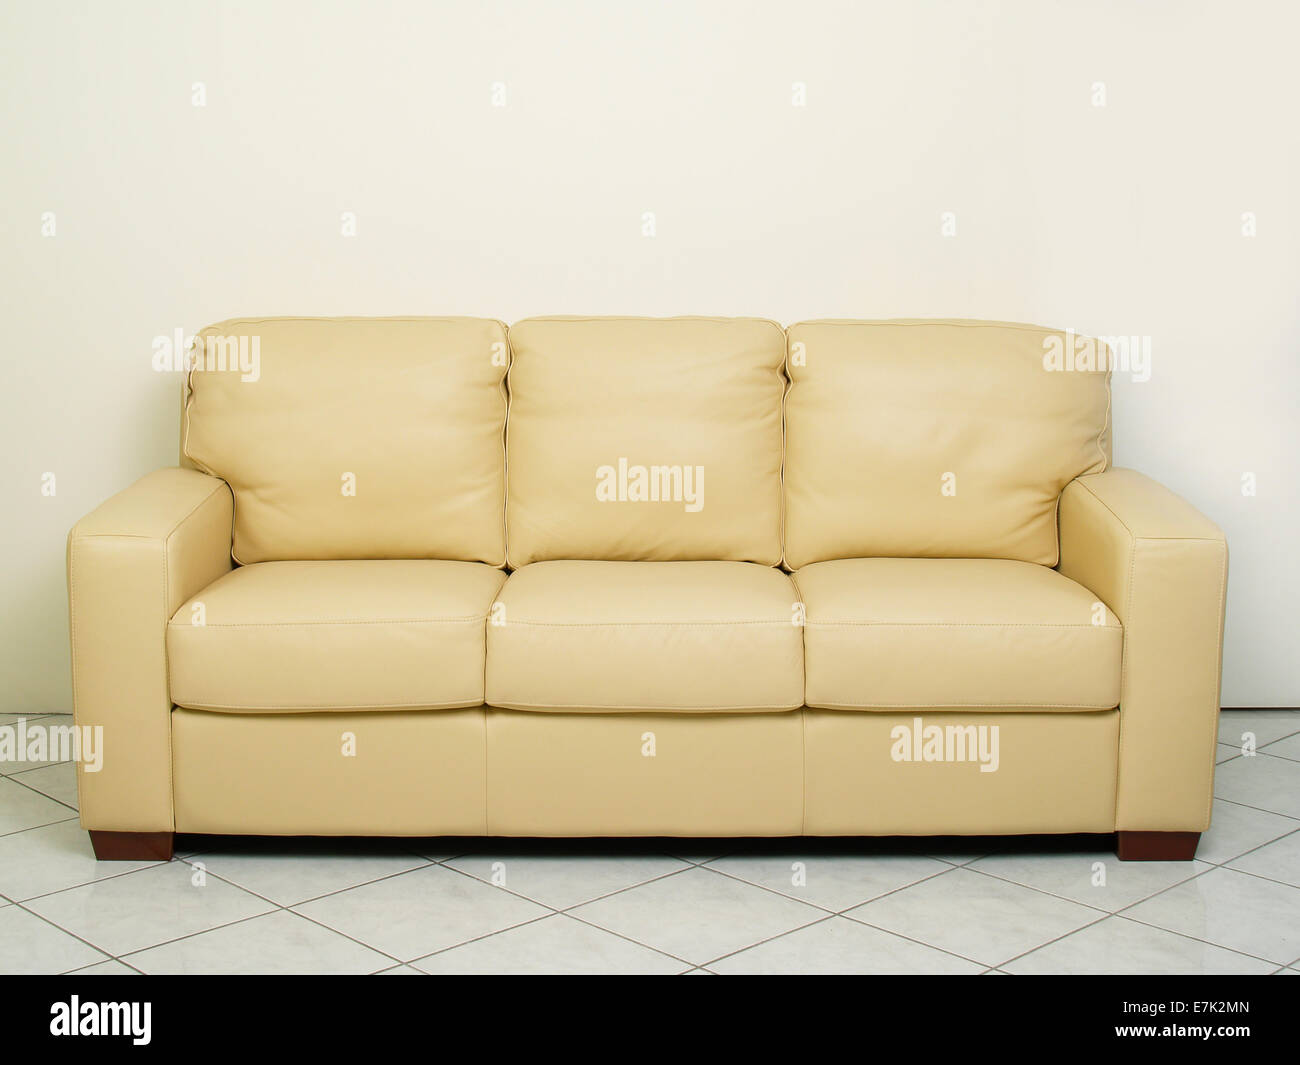 Three seater yellow beige couch / sofa Stock Photo